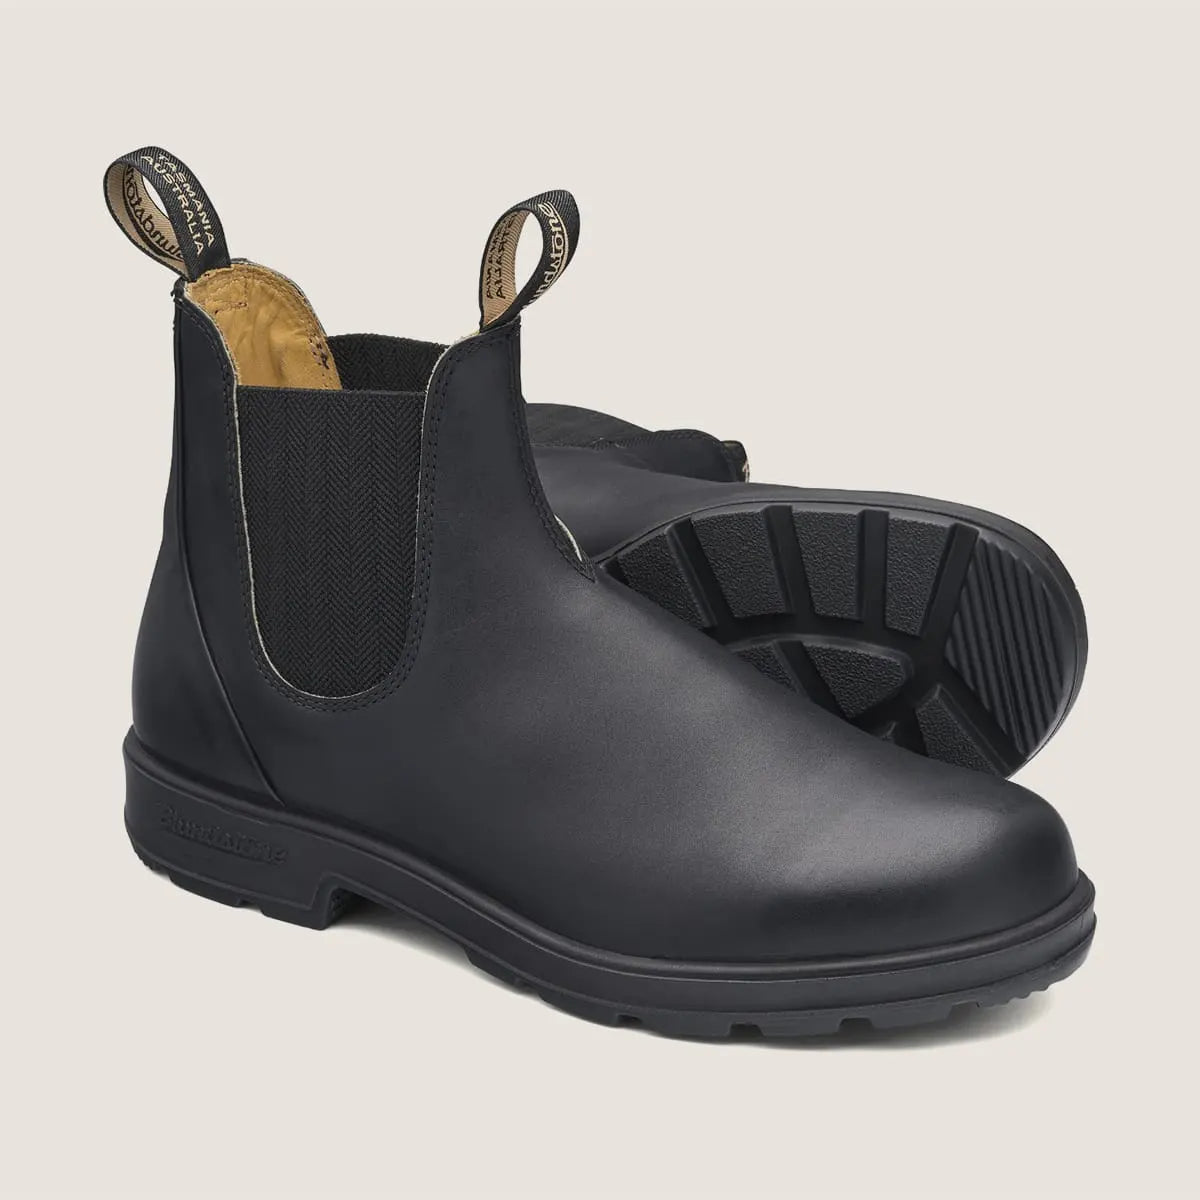 Black Elastic Side Soft Toe Work Boots - made by Blundstone